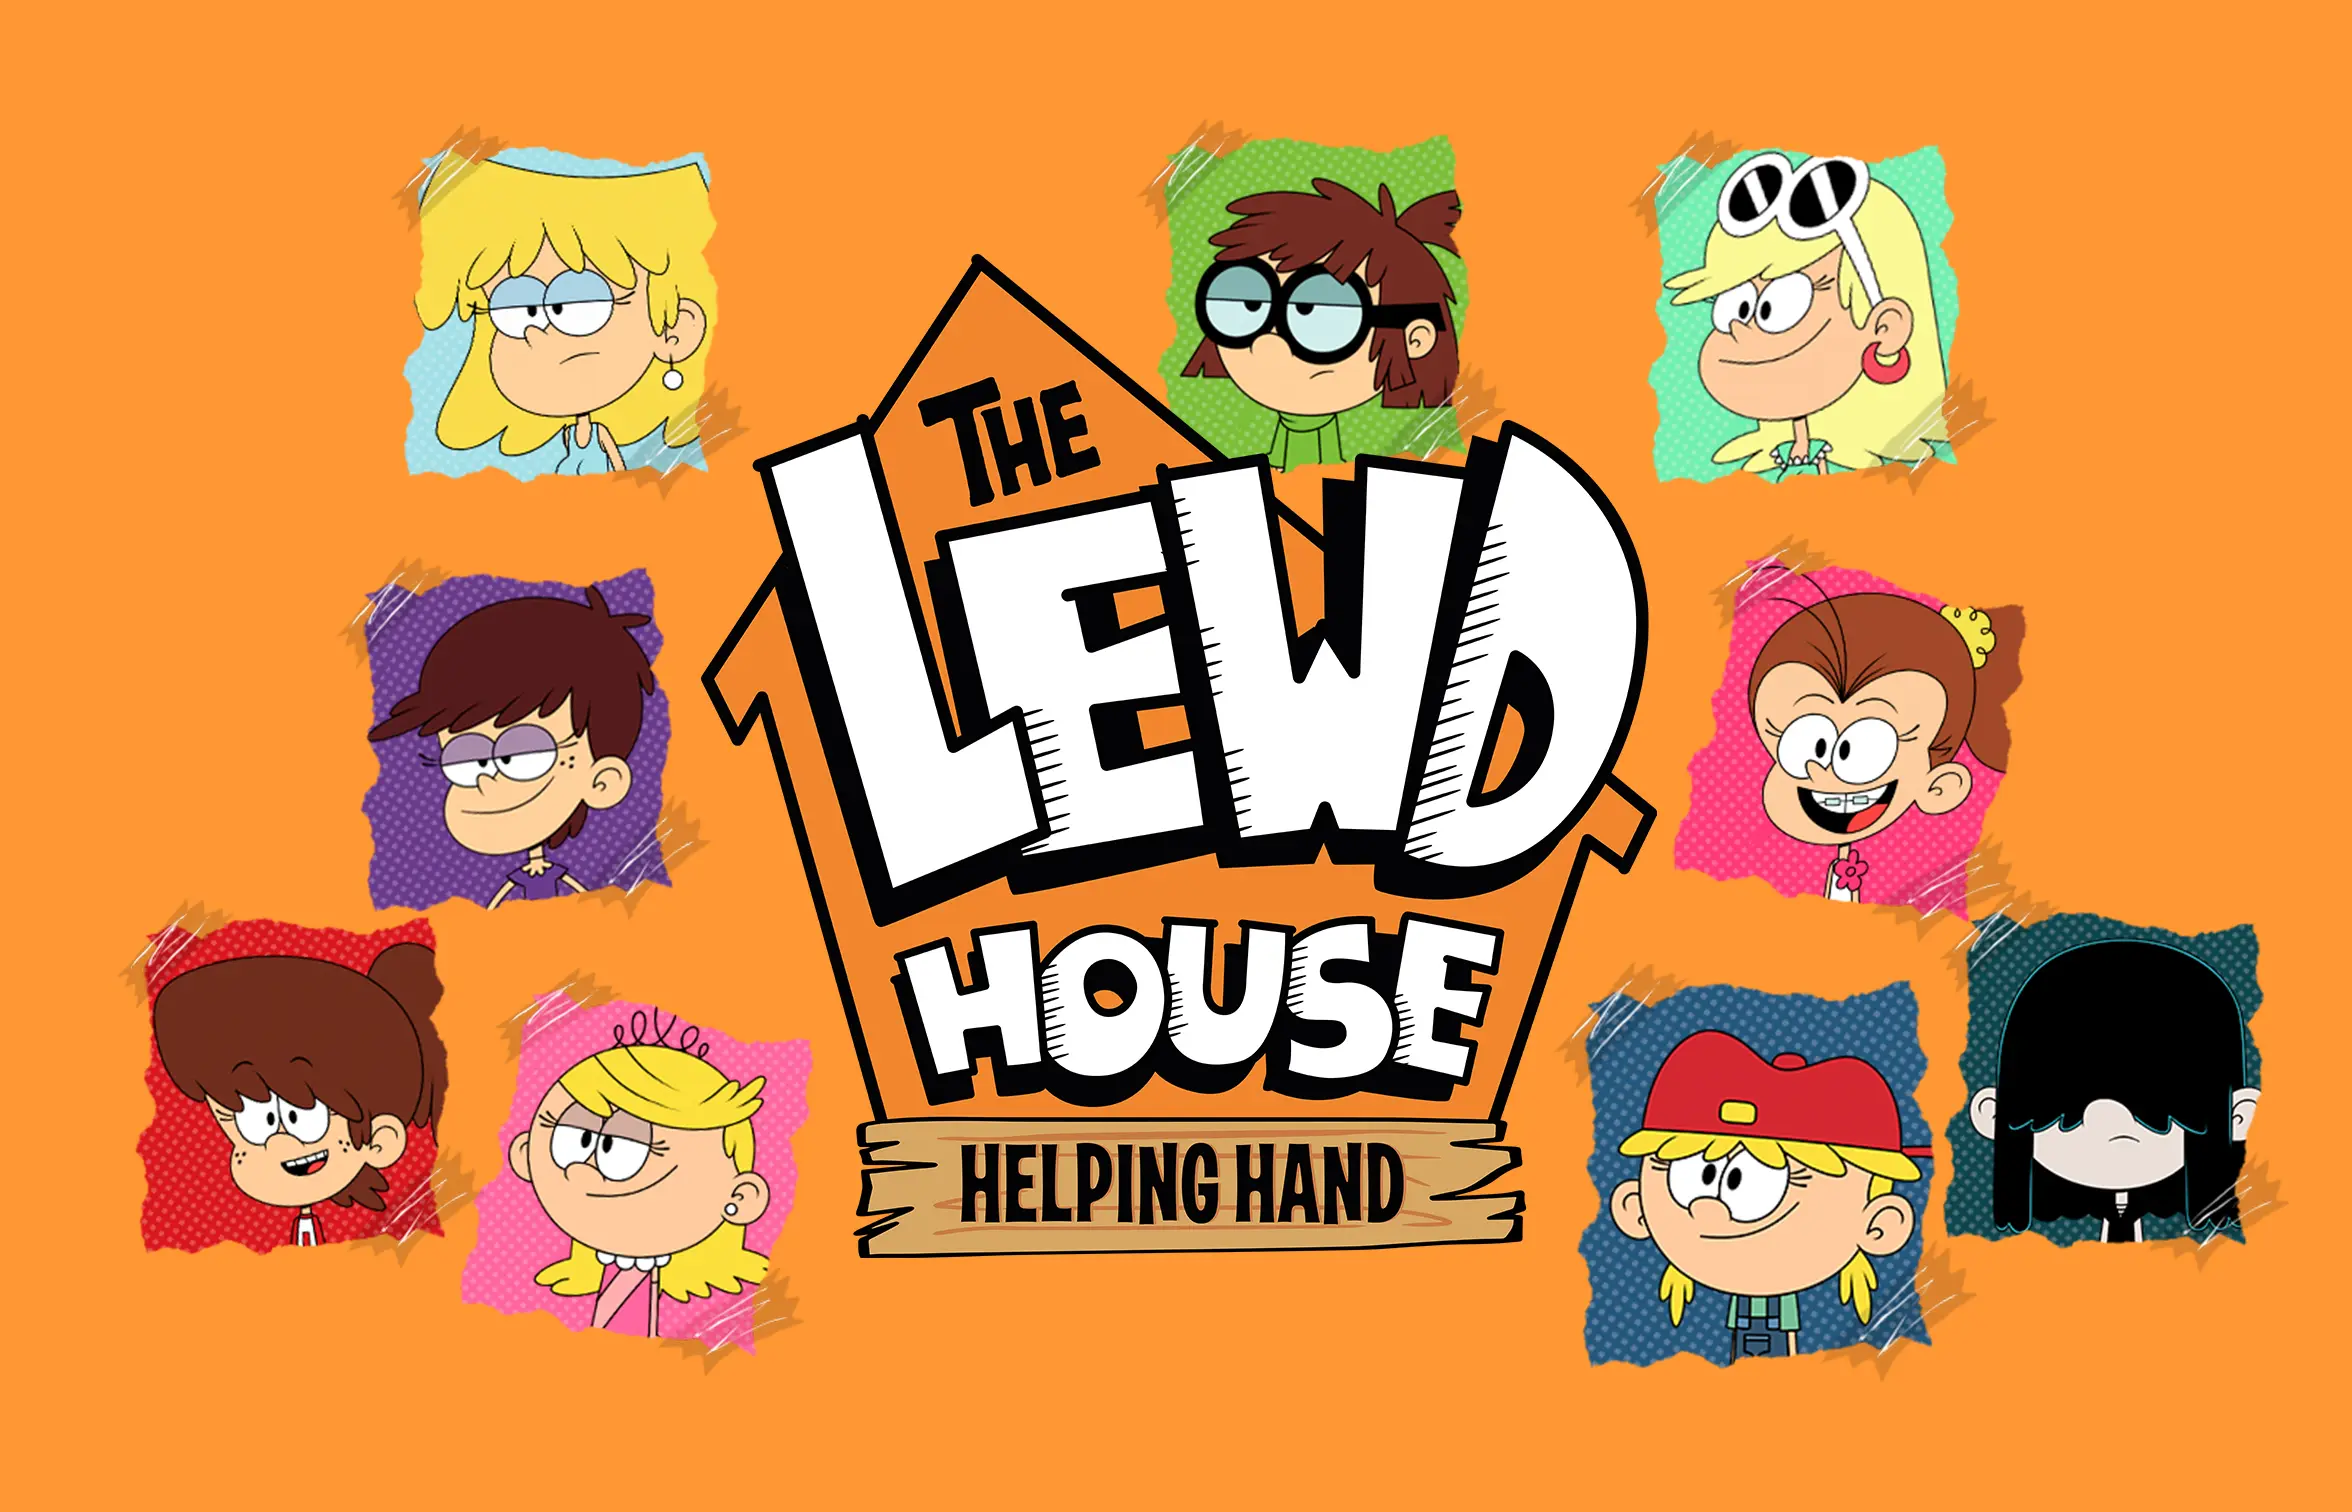 The Lewd House: Helping Hand main image